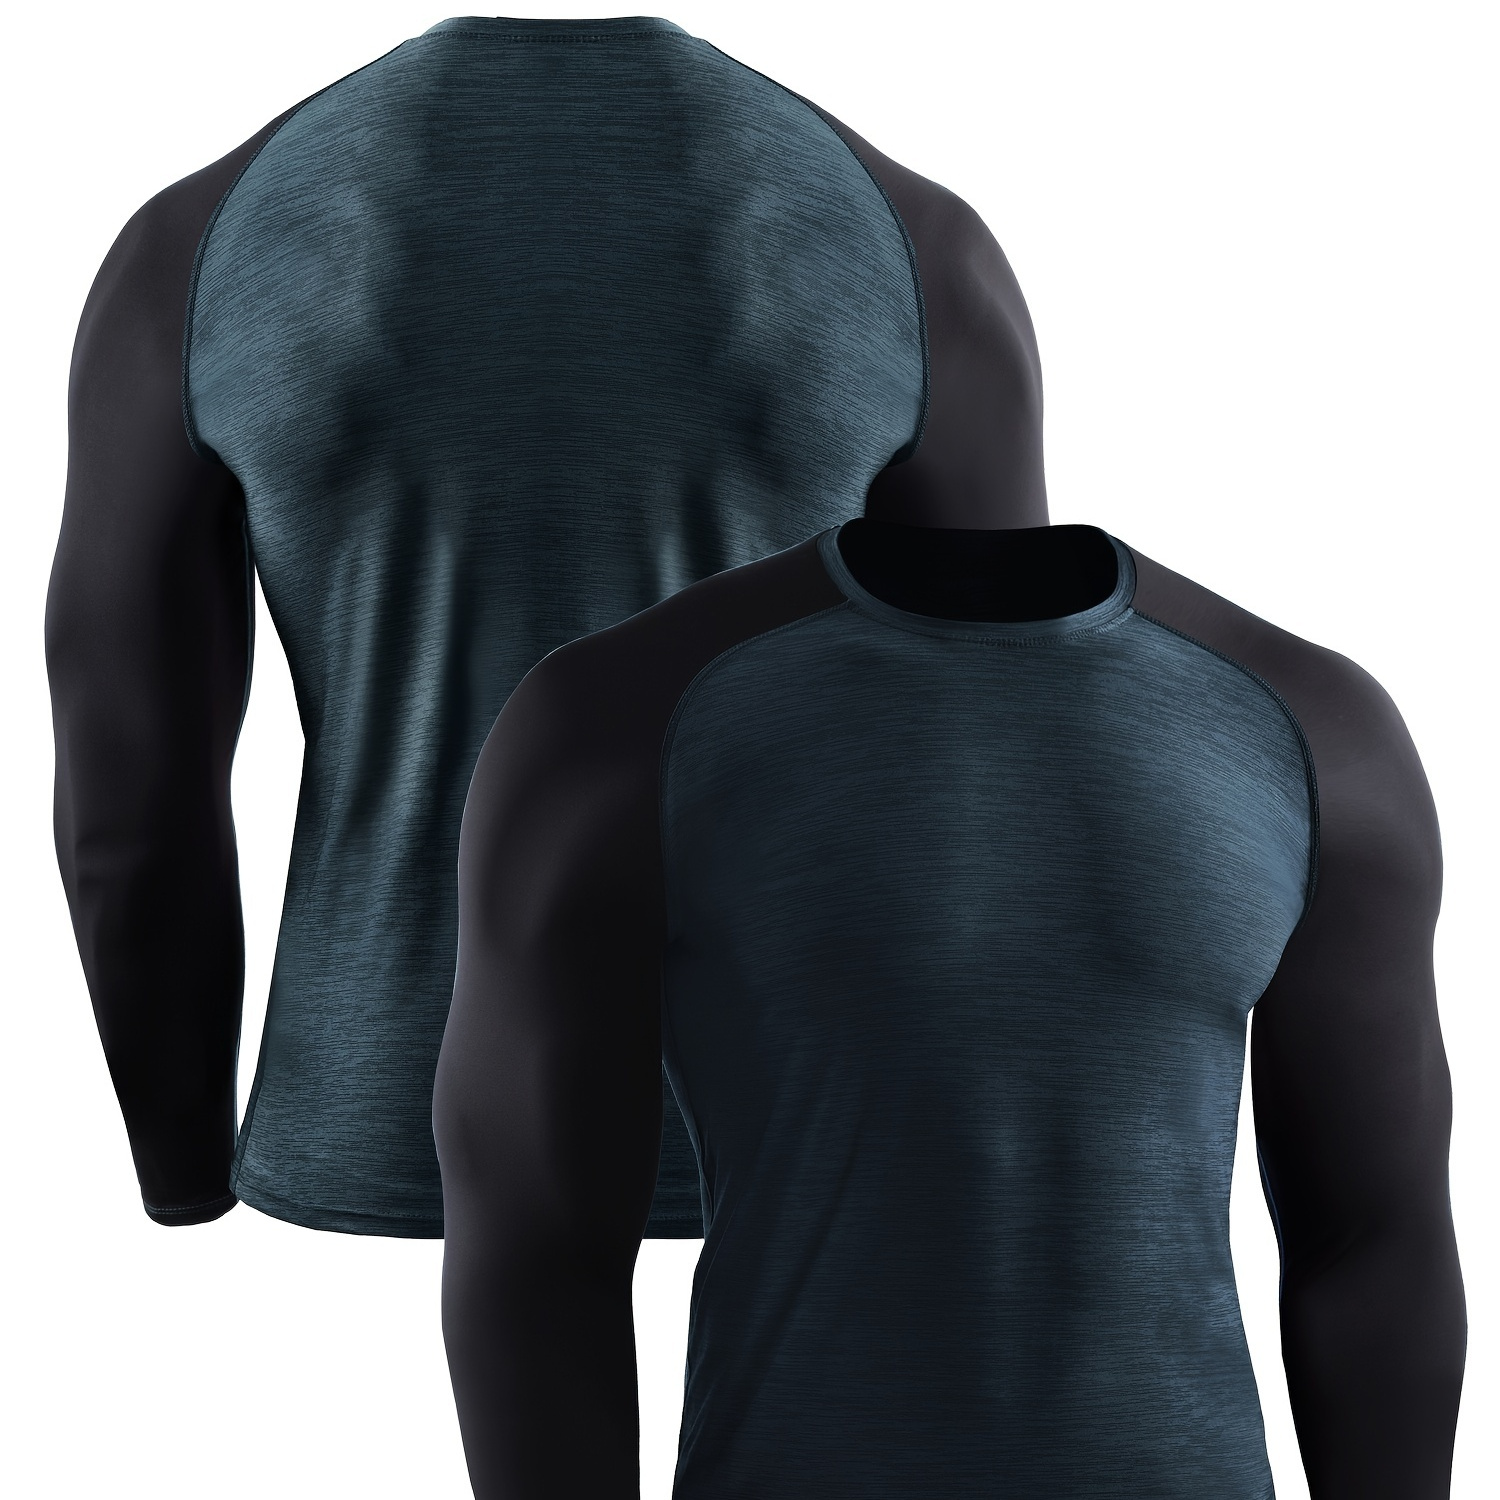  Men's Padded Compression Shirt Sports Protective Vest Rash  Guard Basketball Training Tank Top M : Sports & Outdoors